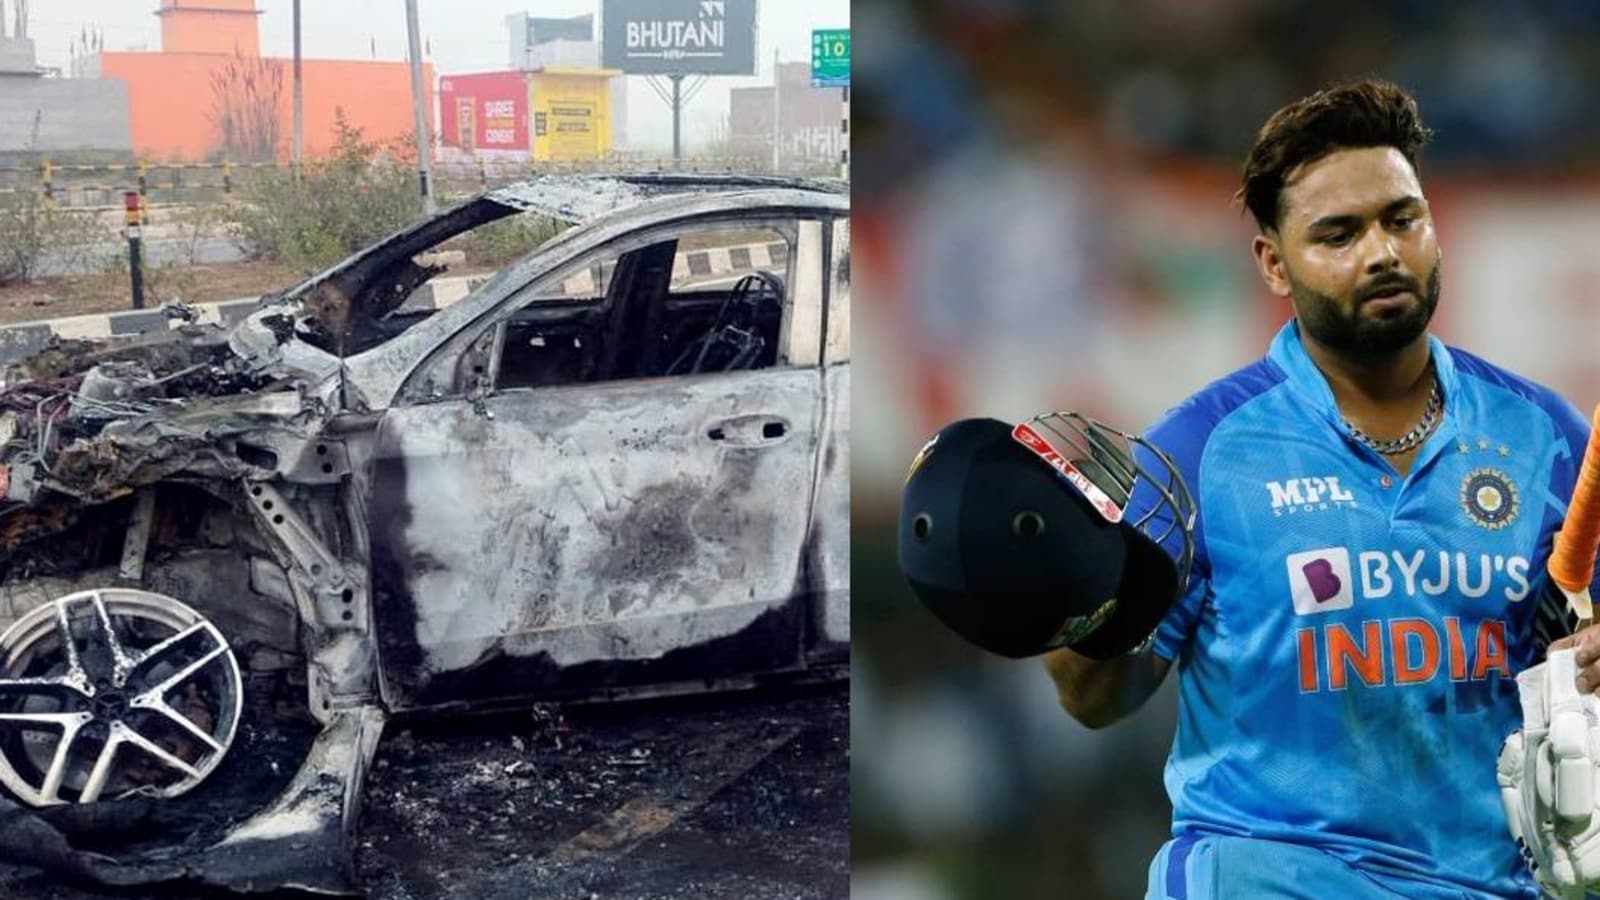 shikhar-dhawan-had-given-this-advice-to-rishabh-panth-if-rishabh-had-listened-to-shikhars-words-this-accident-would-not-have-happened